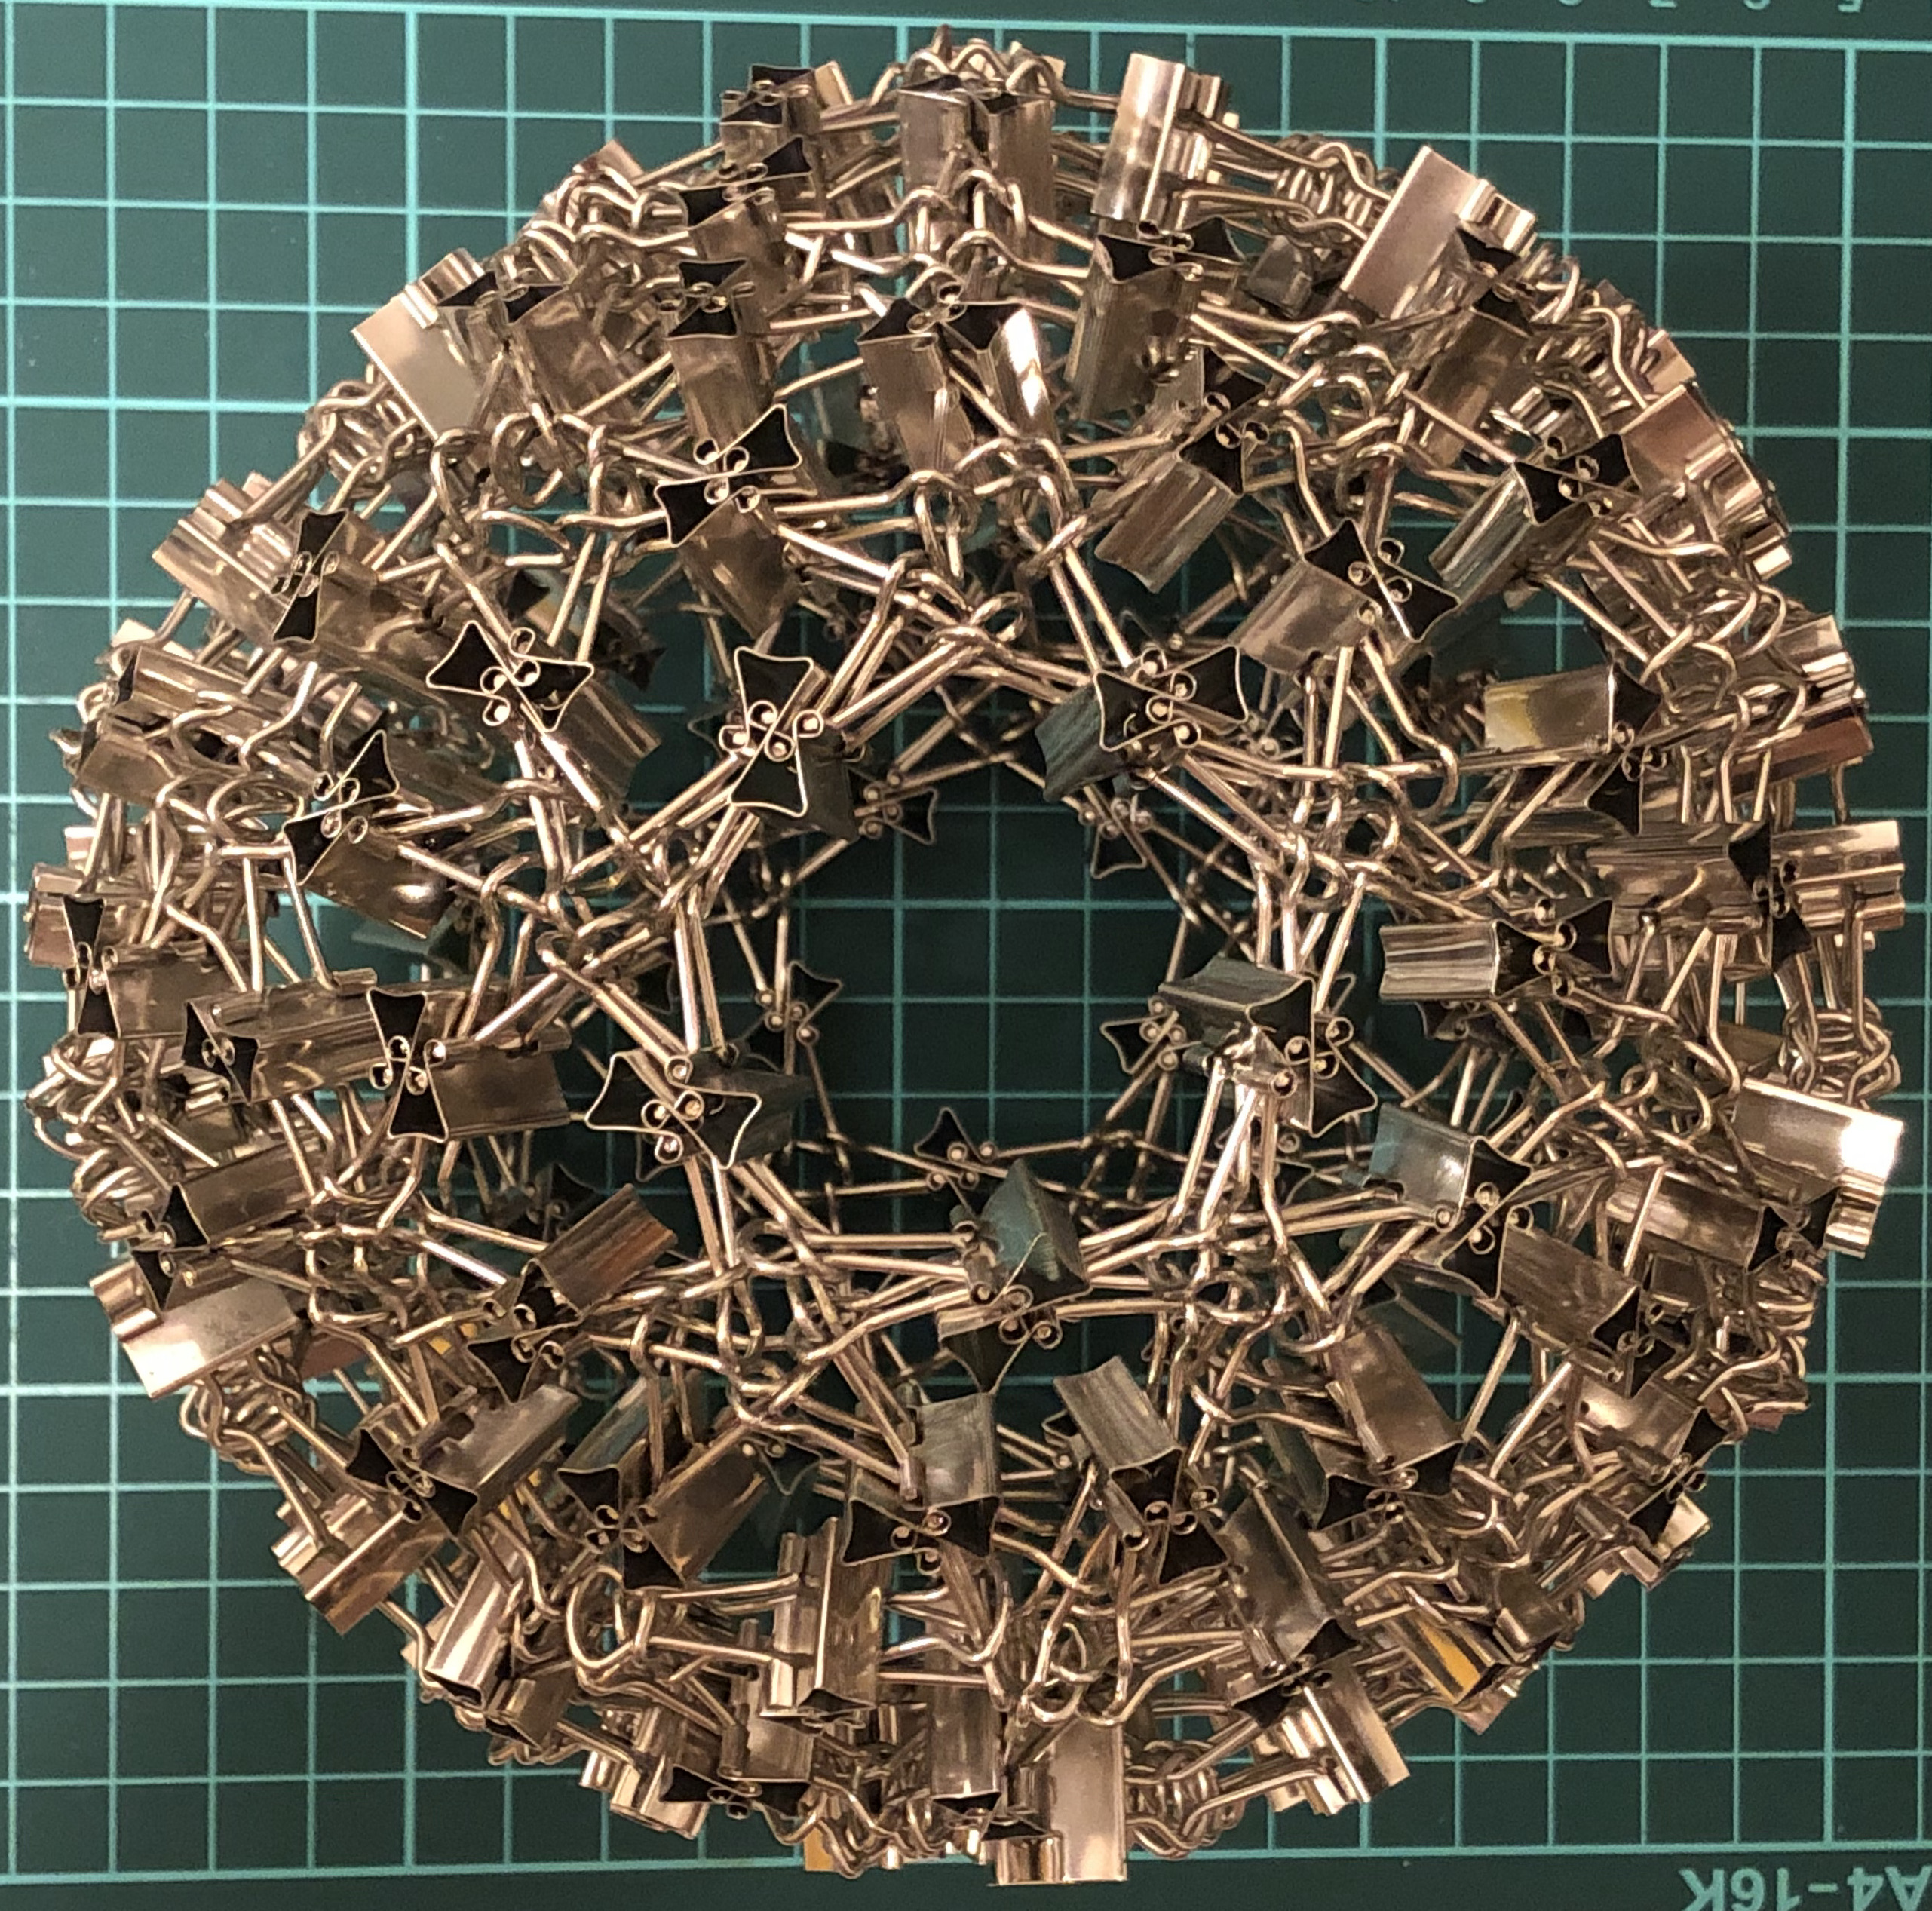 300 clips forming 150 I-edges forming snub dodecahedron